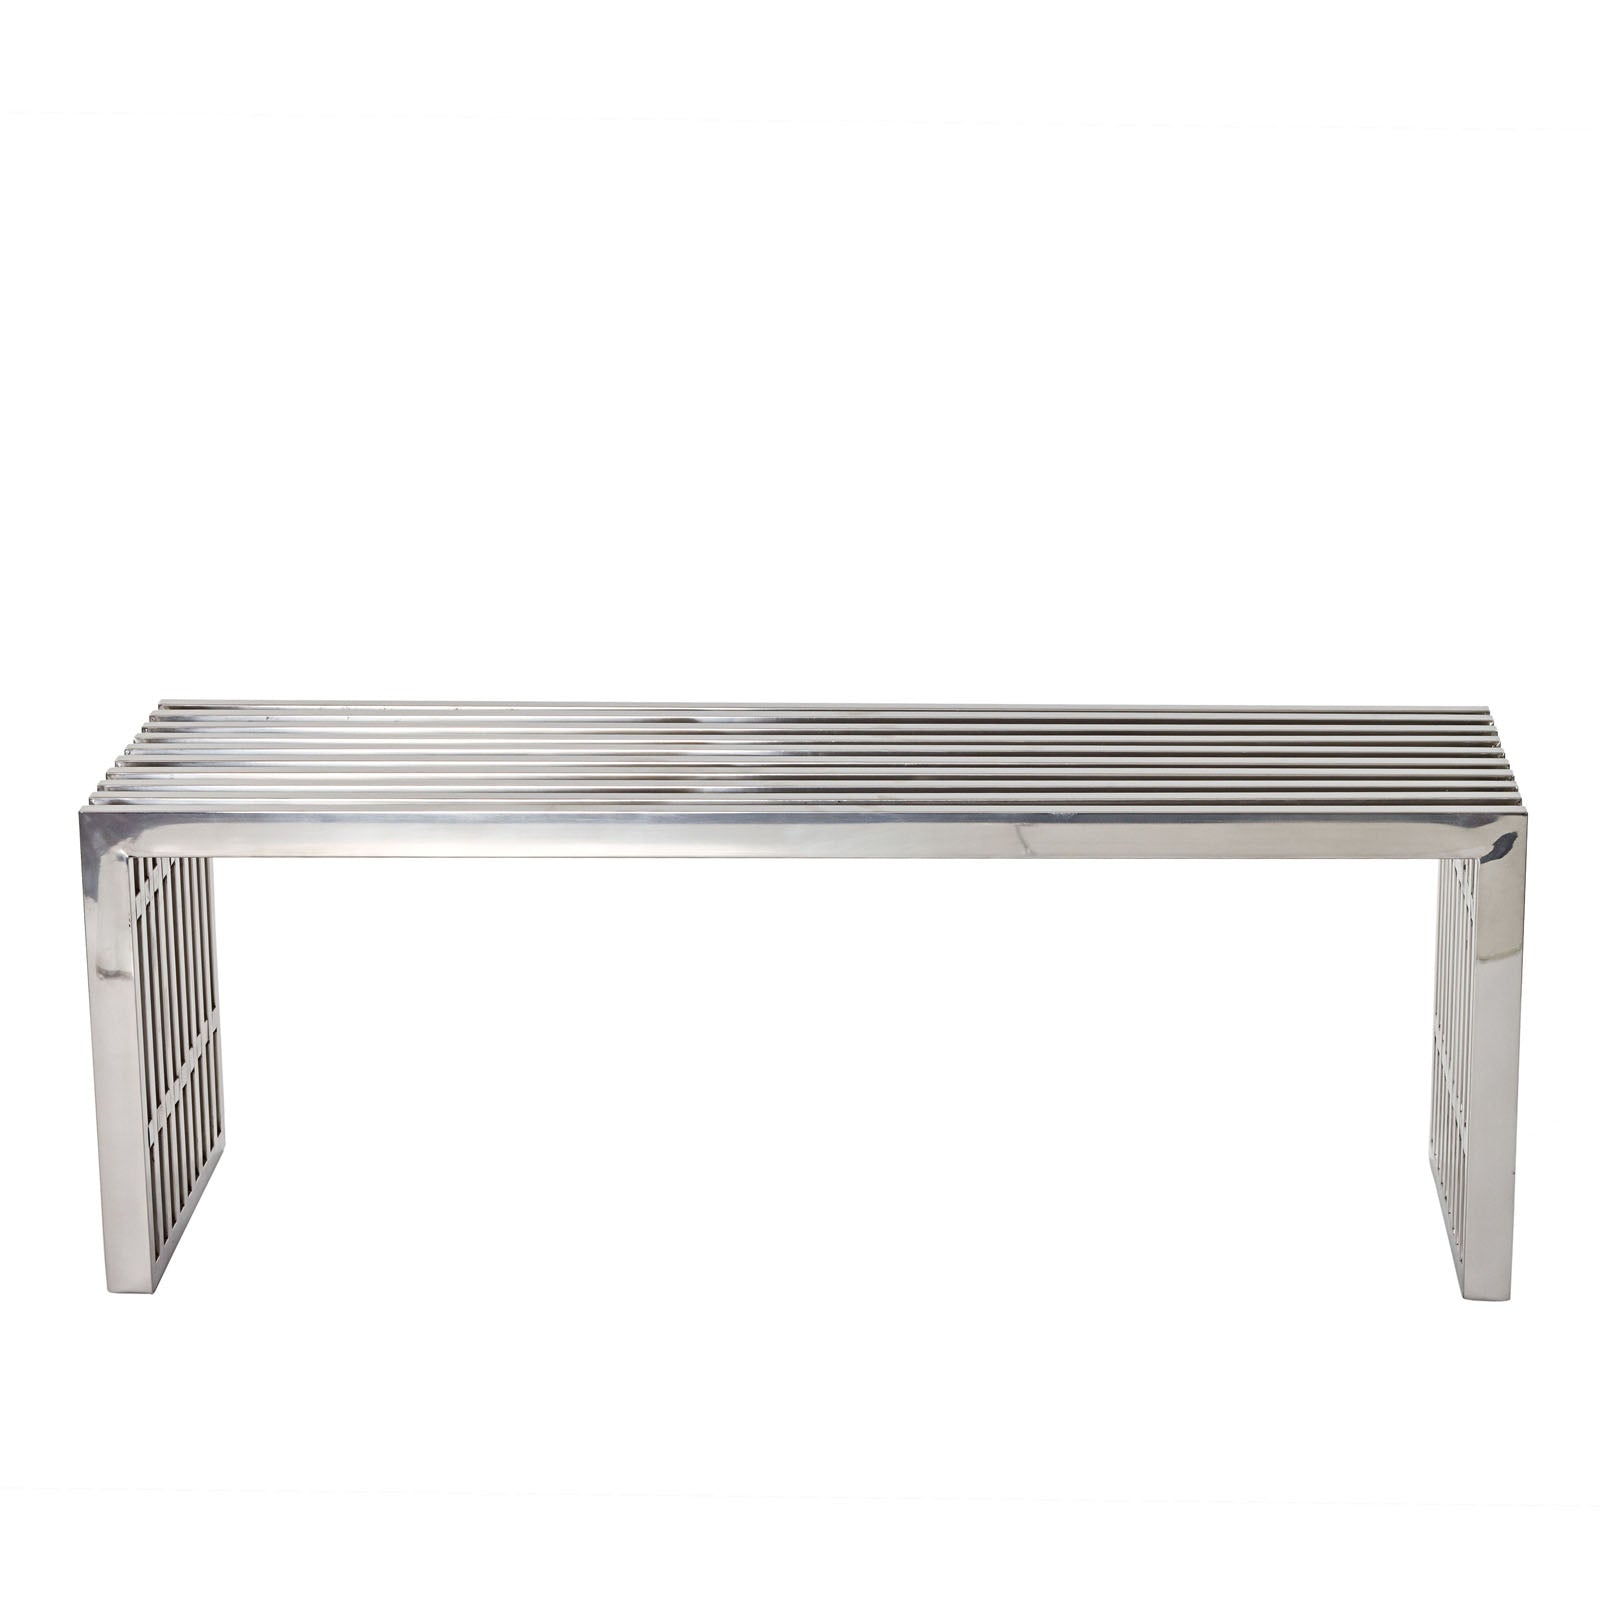 Gridiron Medium Stainless Steel Bench-Bench-Modway-Wall2Wall Furnishings